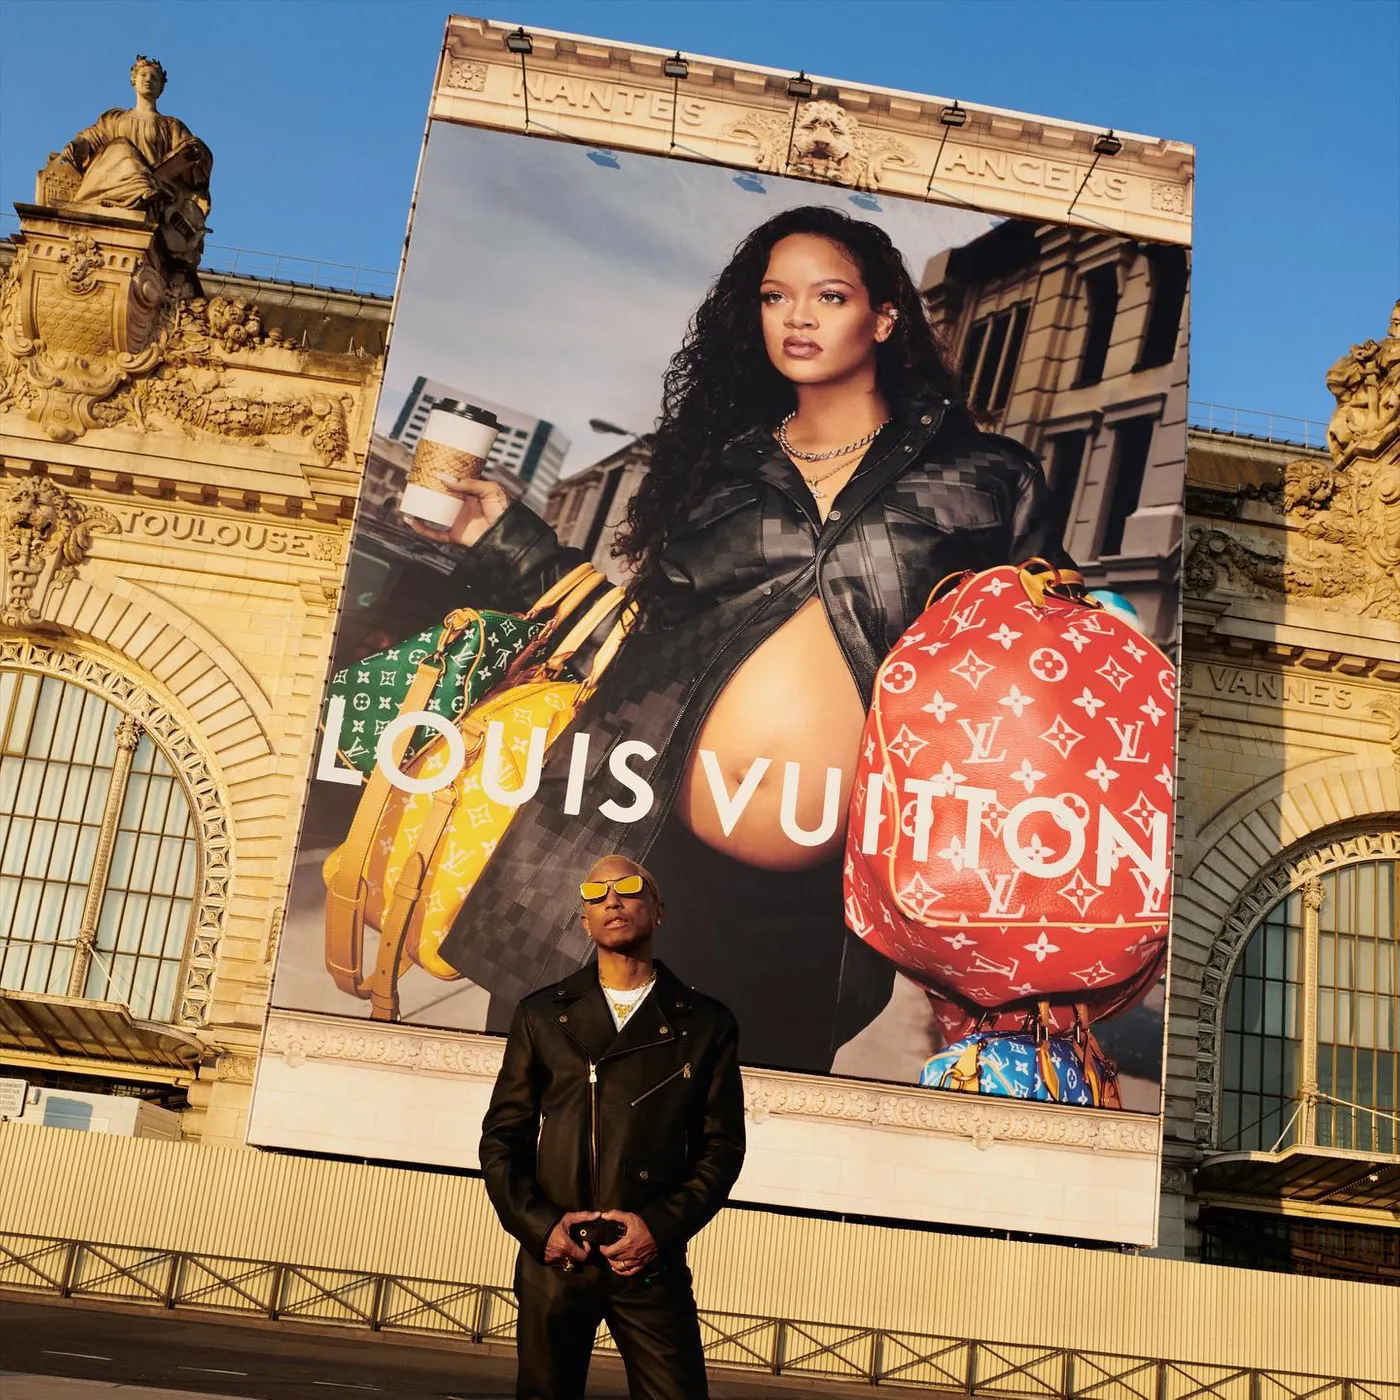 Louis Vuitton shows playful, French styles at Musee d'Orsay in Paris